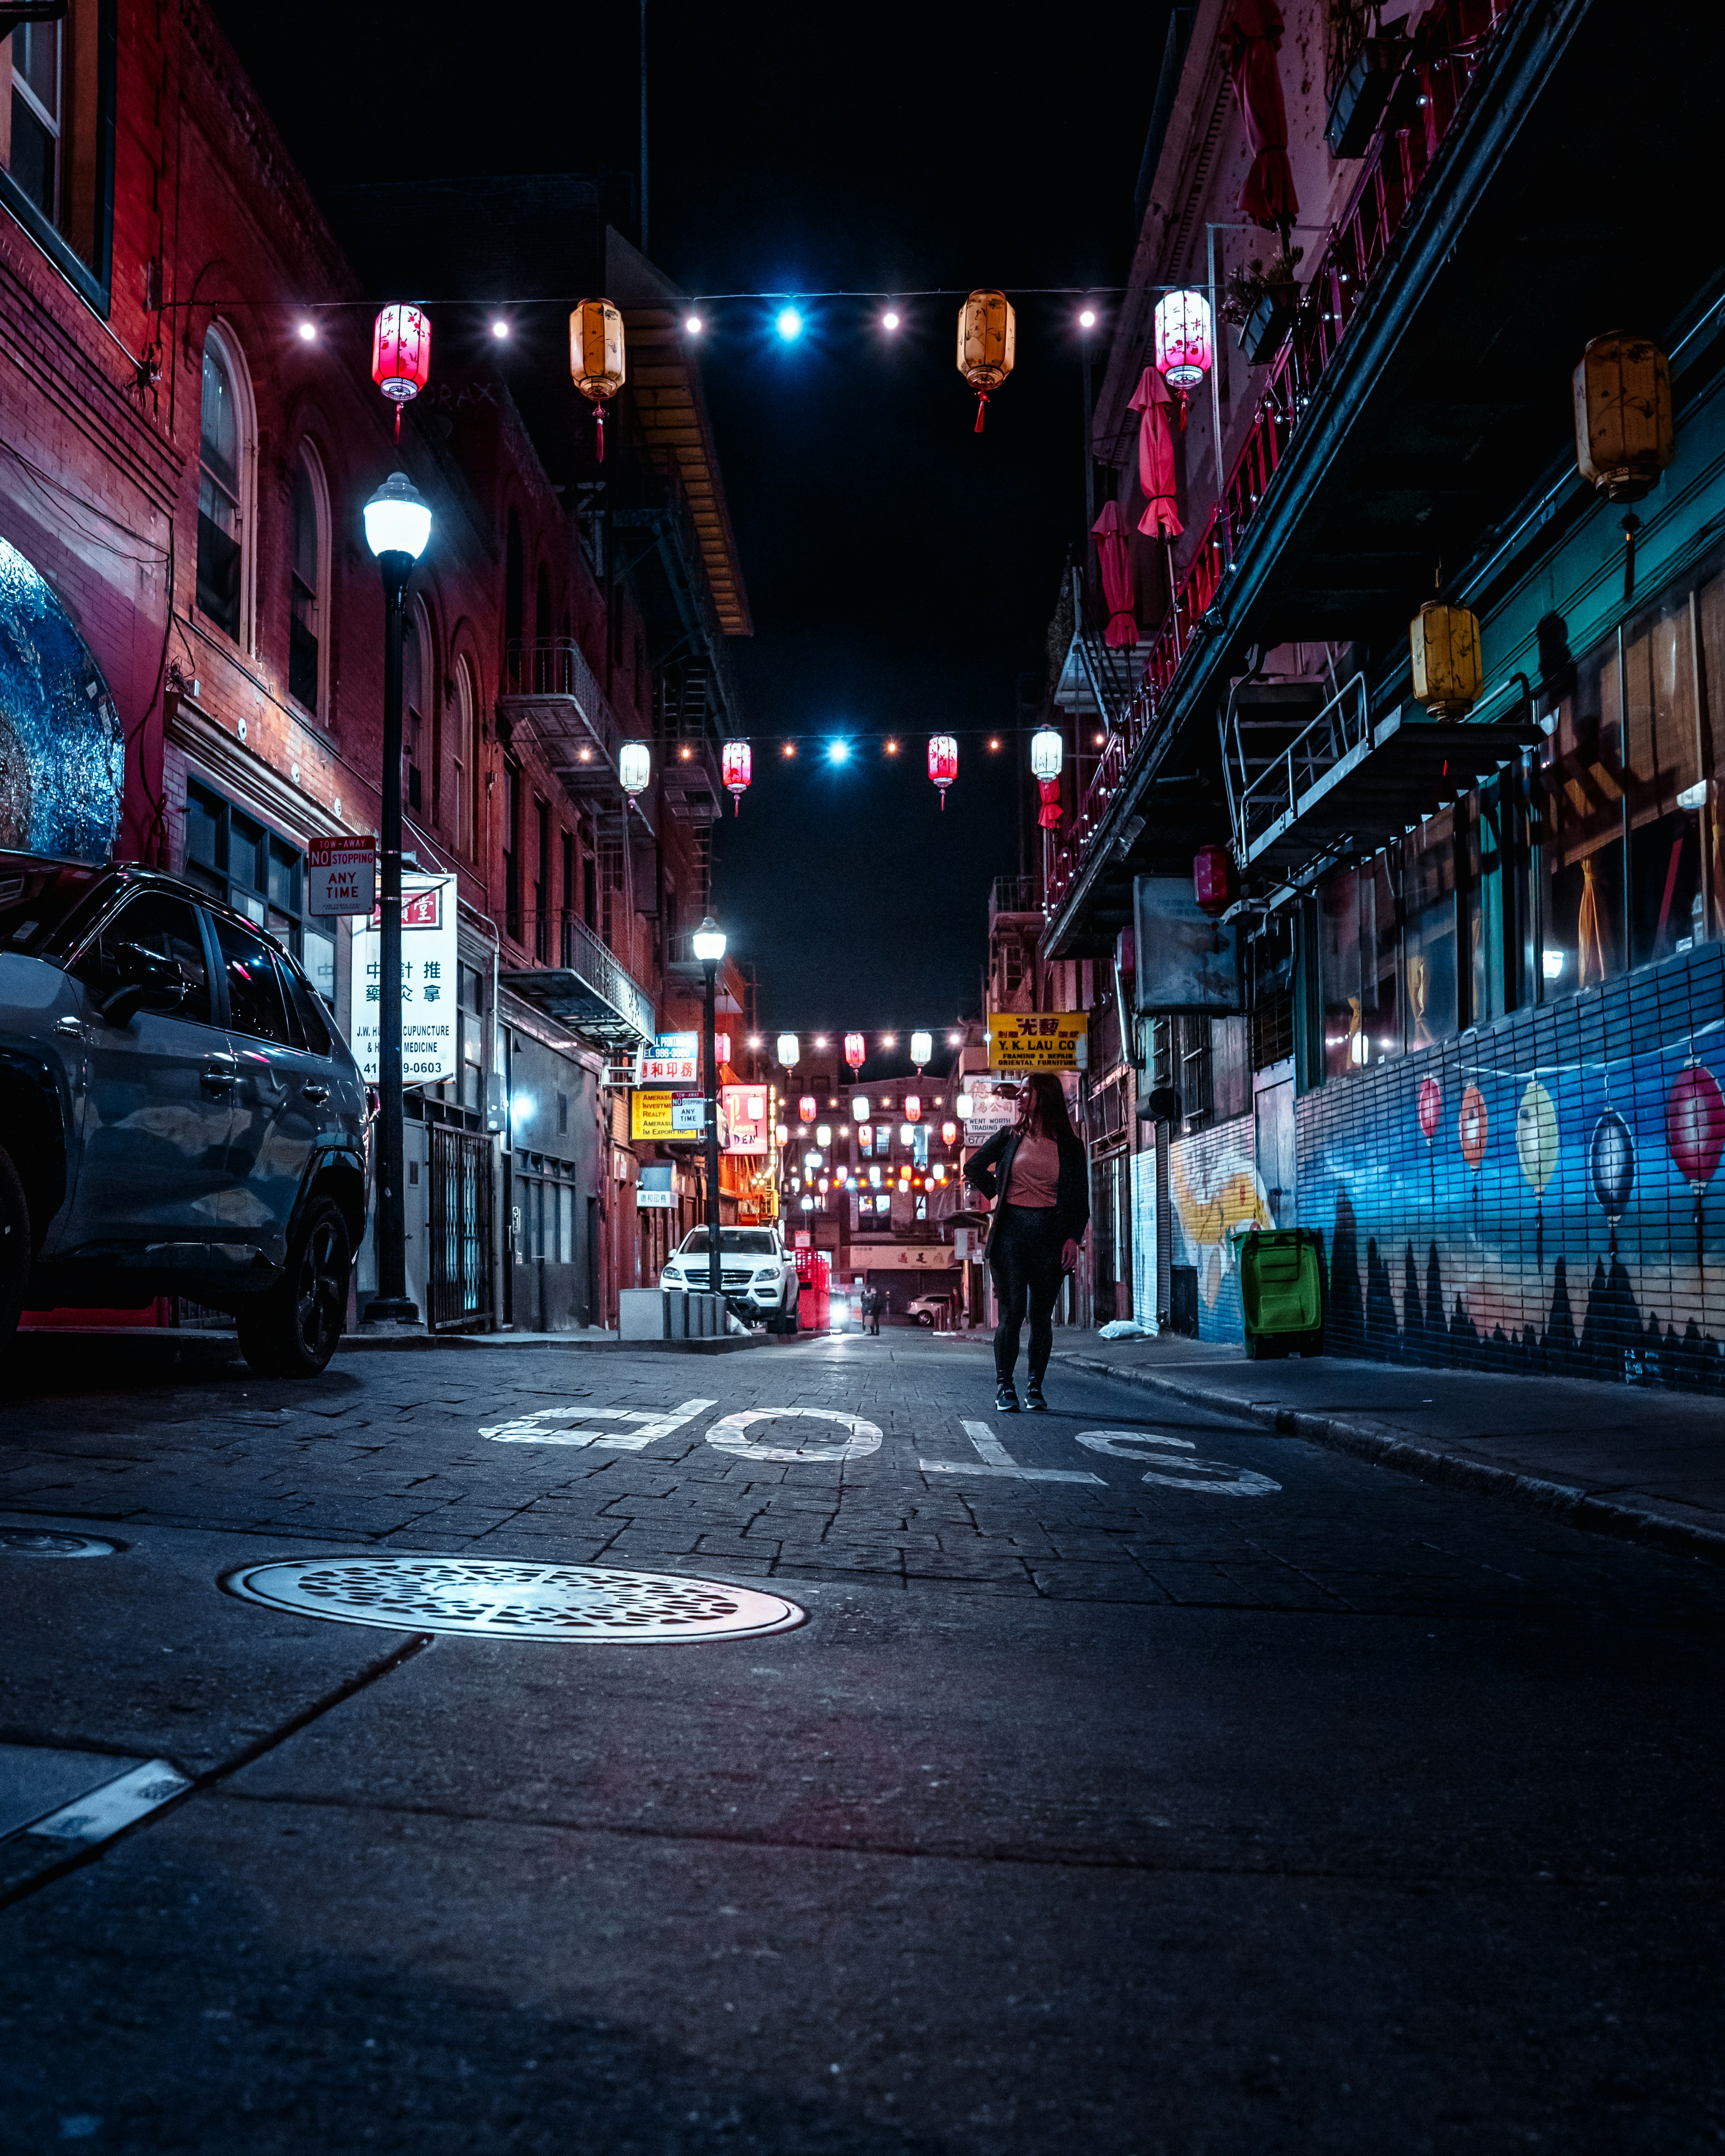 Incredible colorful aesthetic vibrant movie like film street life night photography in Chinatown San Francisco in alleyway